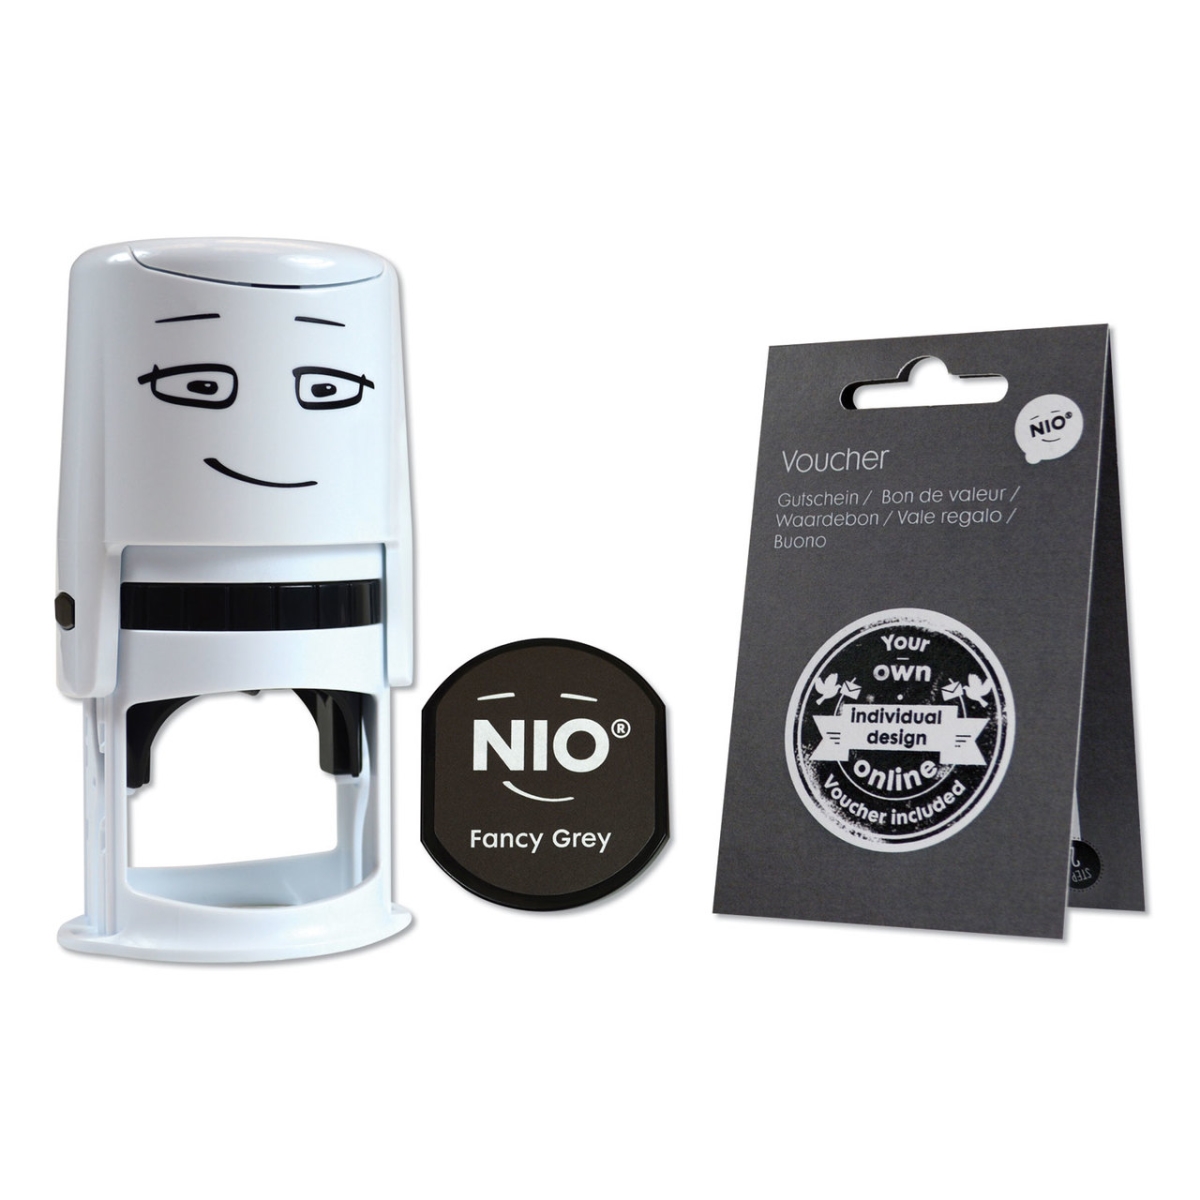 Picture of Consolidated Stamp COS071509 Stamp with NIO Voucher & Fancy Gray Ink Pad